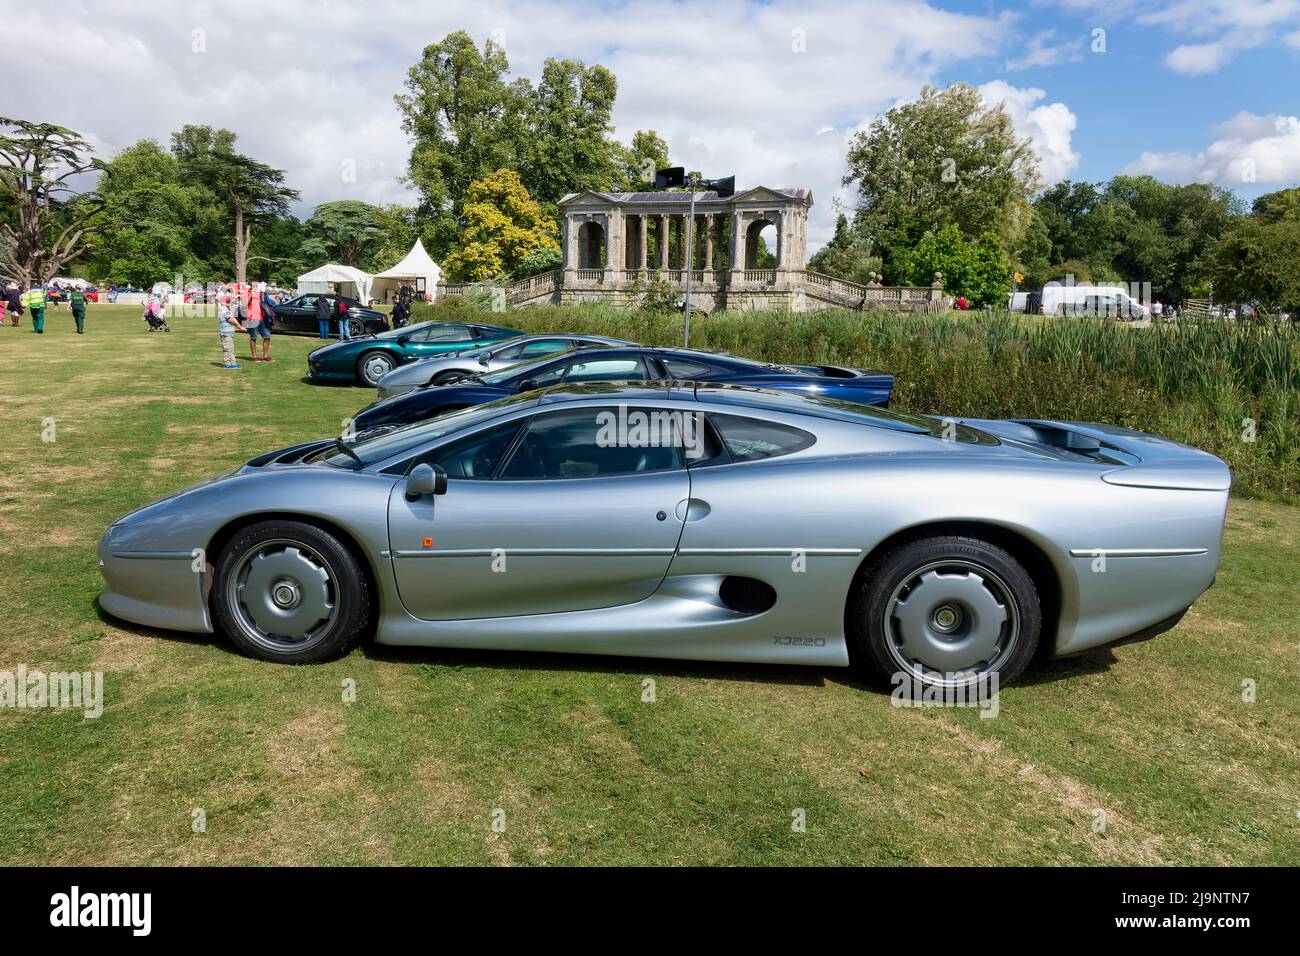 Wilton, Wiltshire, UK - August 10, 2014: A Jaguar XJ220 Supercar at the Wilton House Classic and Supercar Show 2014 Stock Photo